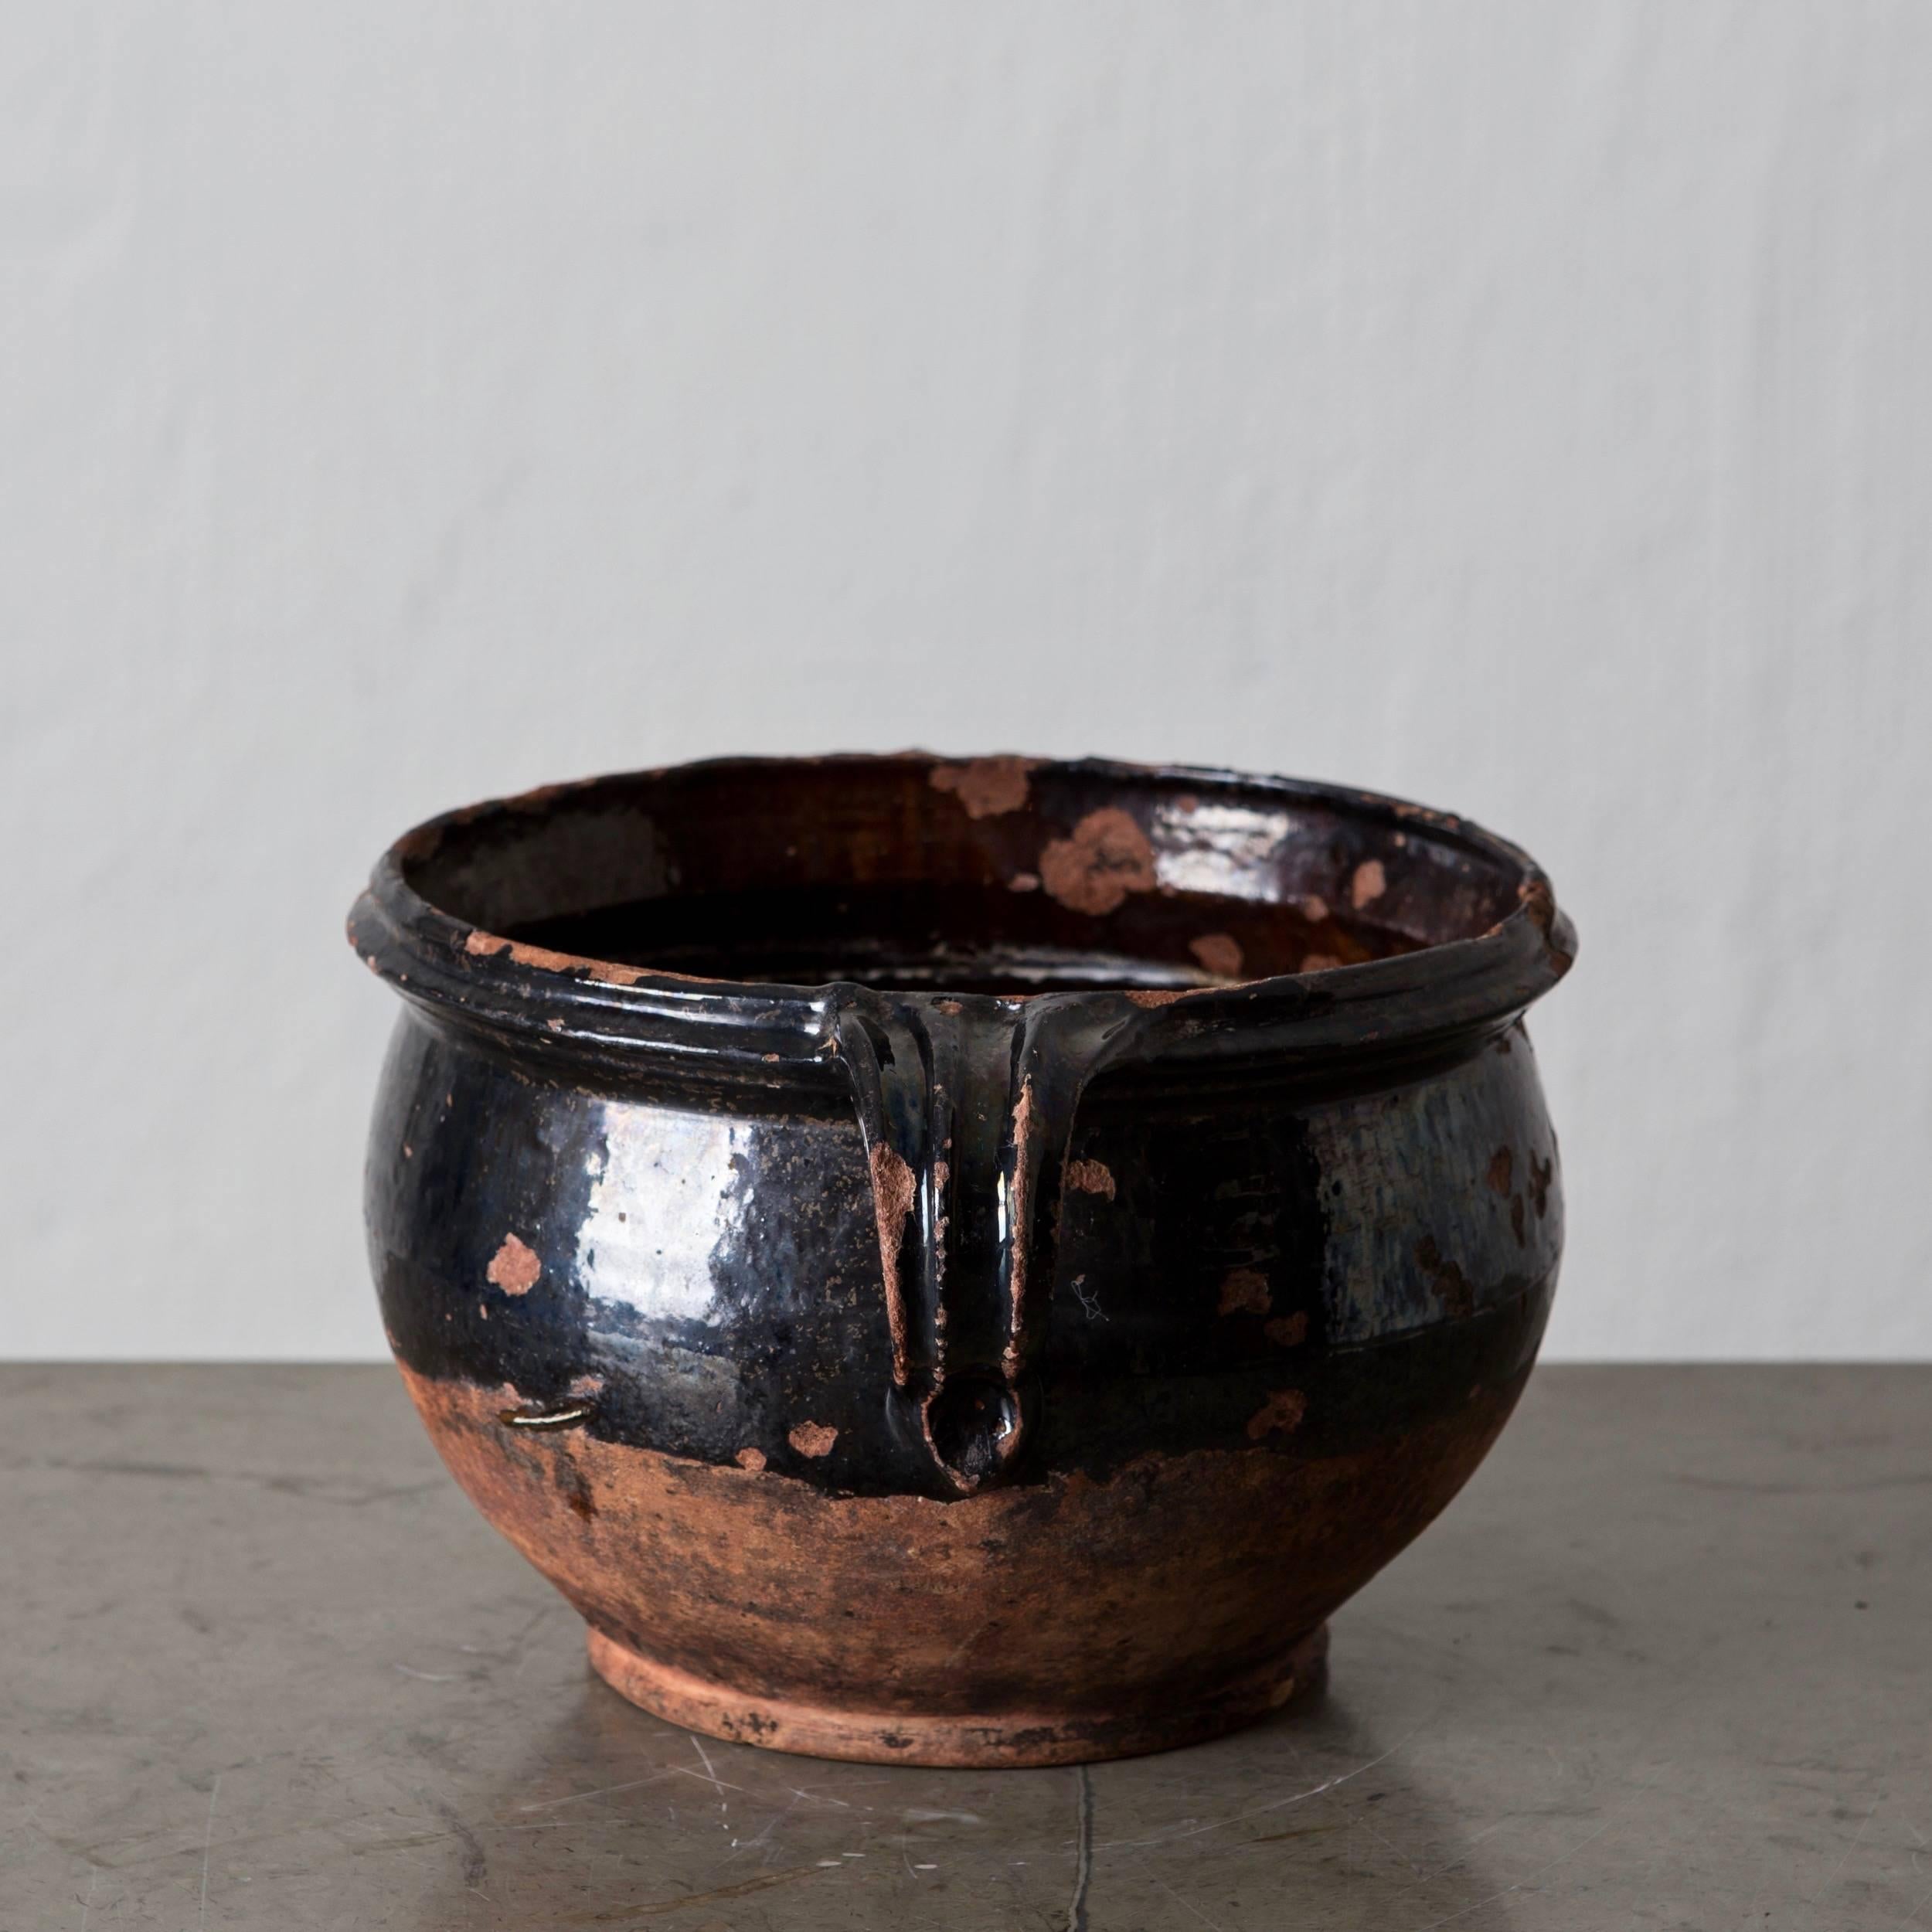 A terracotta jar pot with black salt glaze made in southern Sweden during the 19th century.